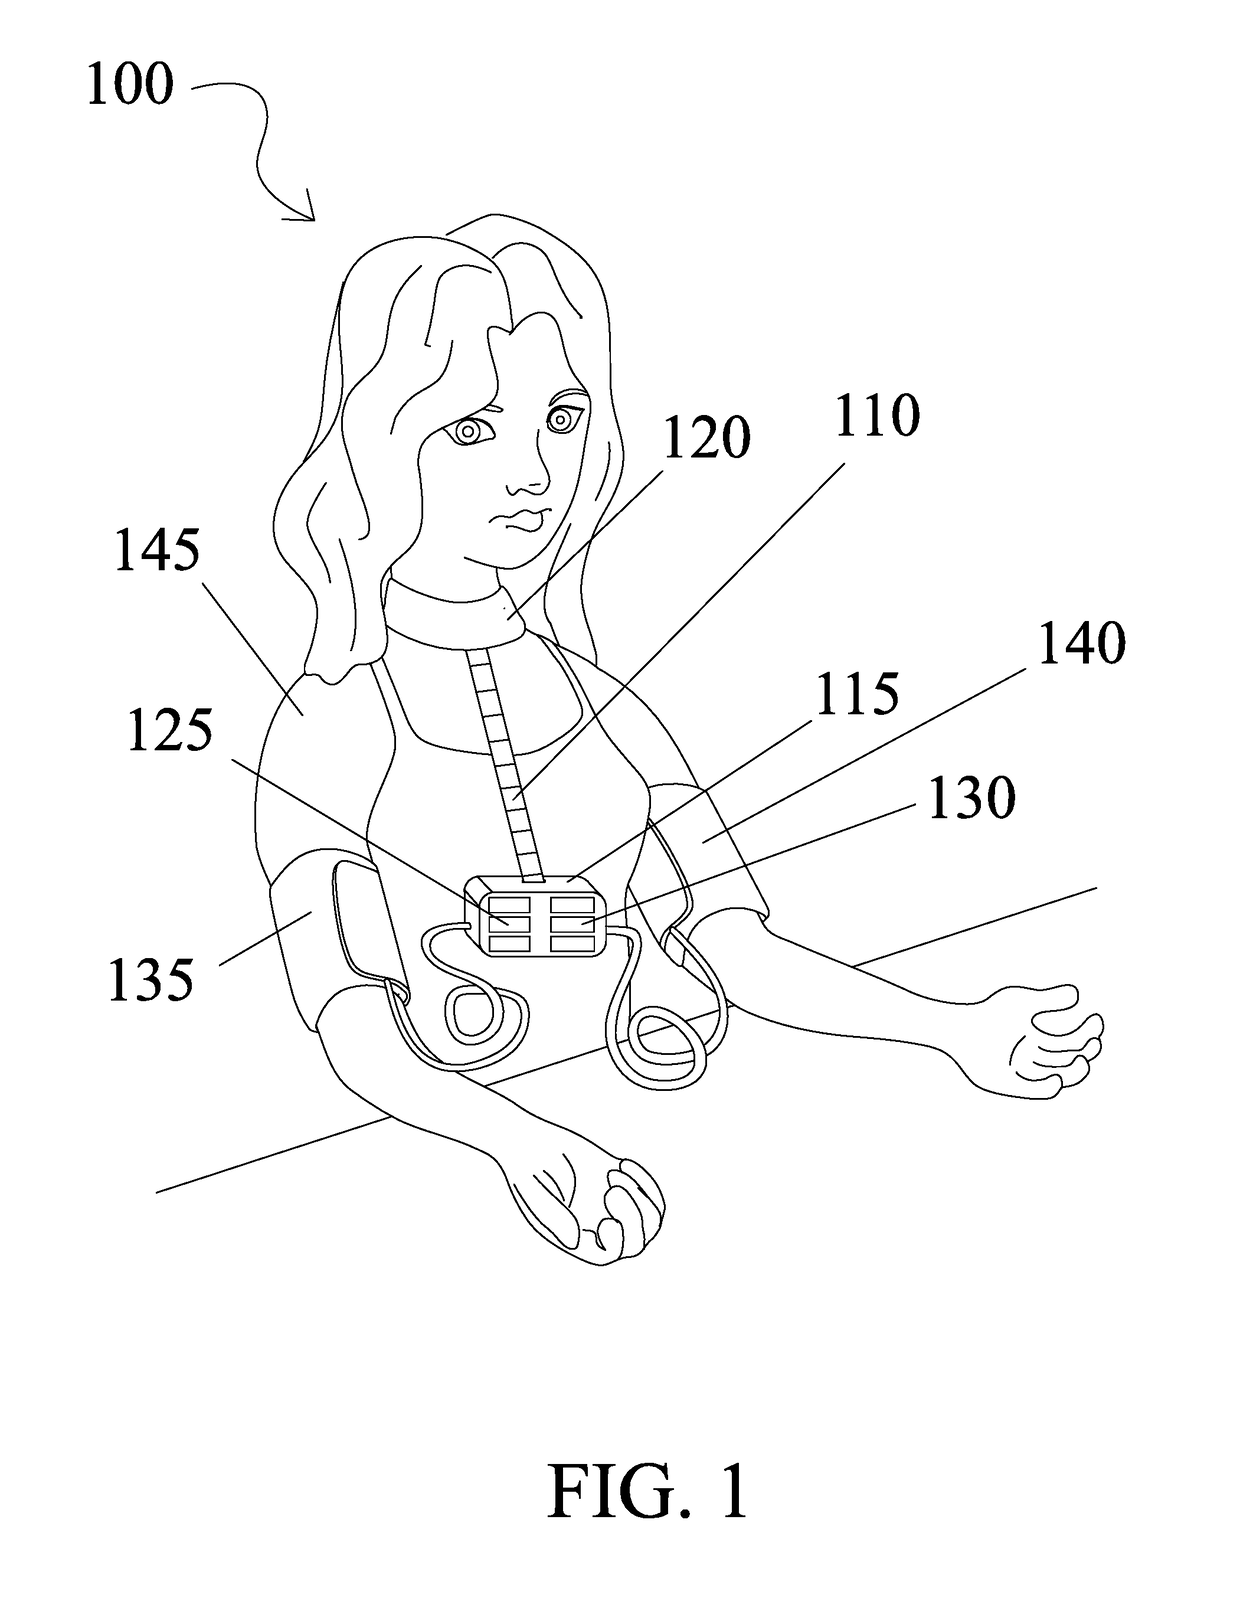 Simultaneous bi-lateral blood pressure system with position indicator